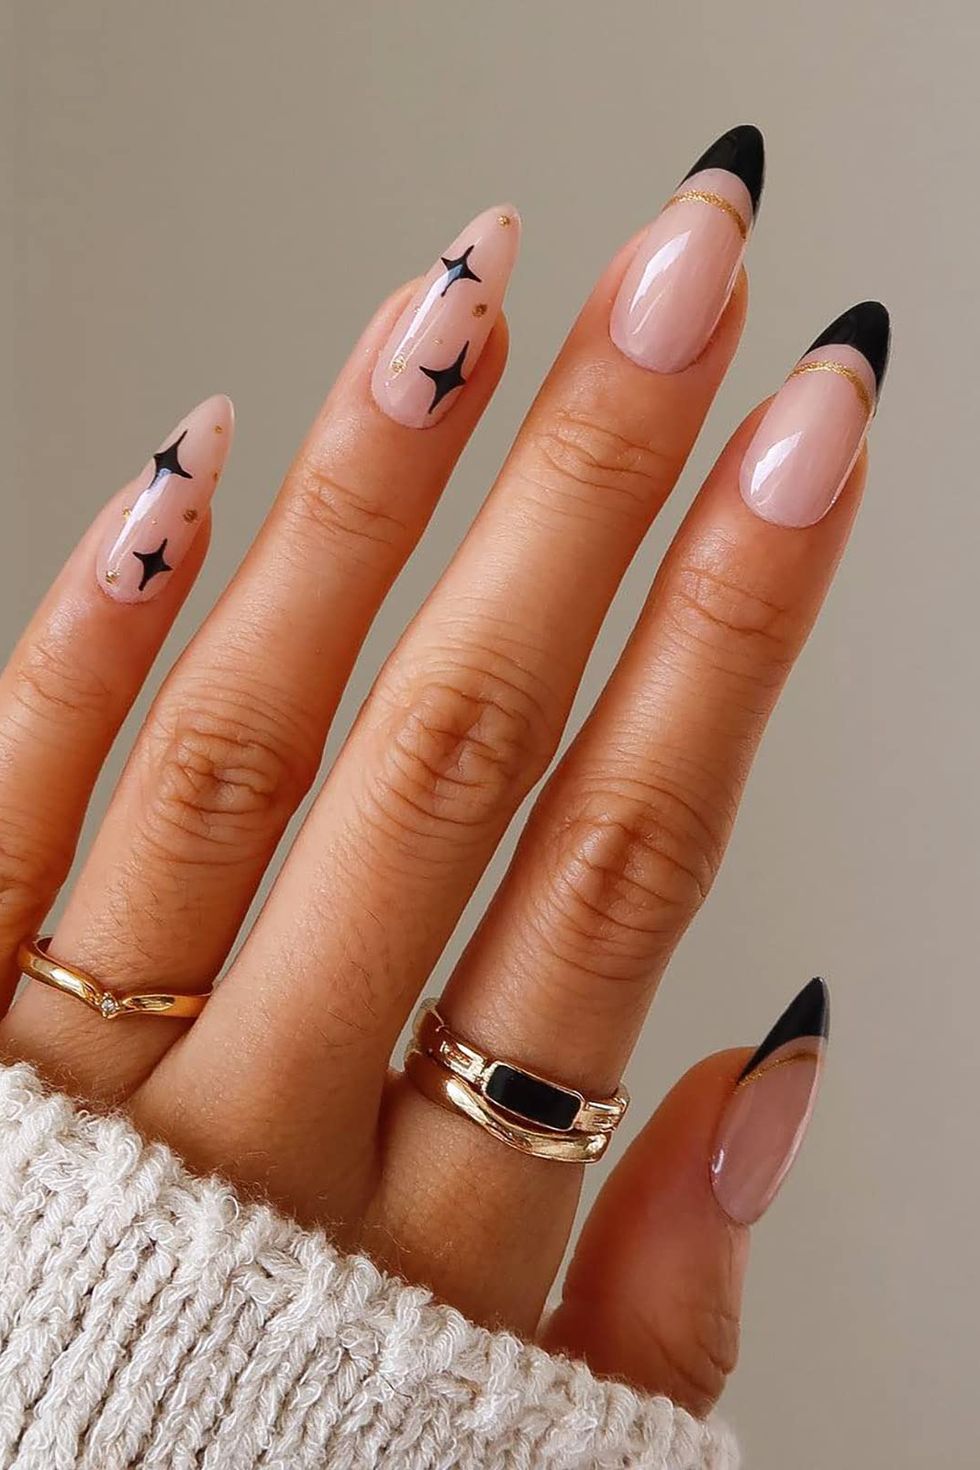 20 Swirl Nail Designs That Leave Us Spinning